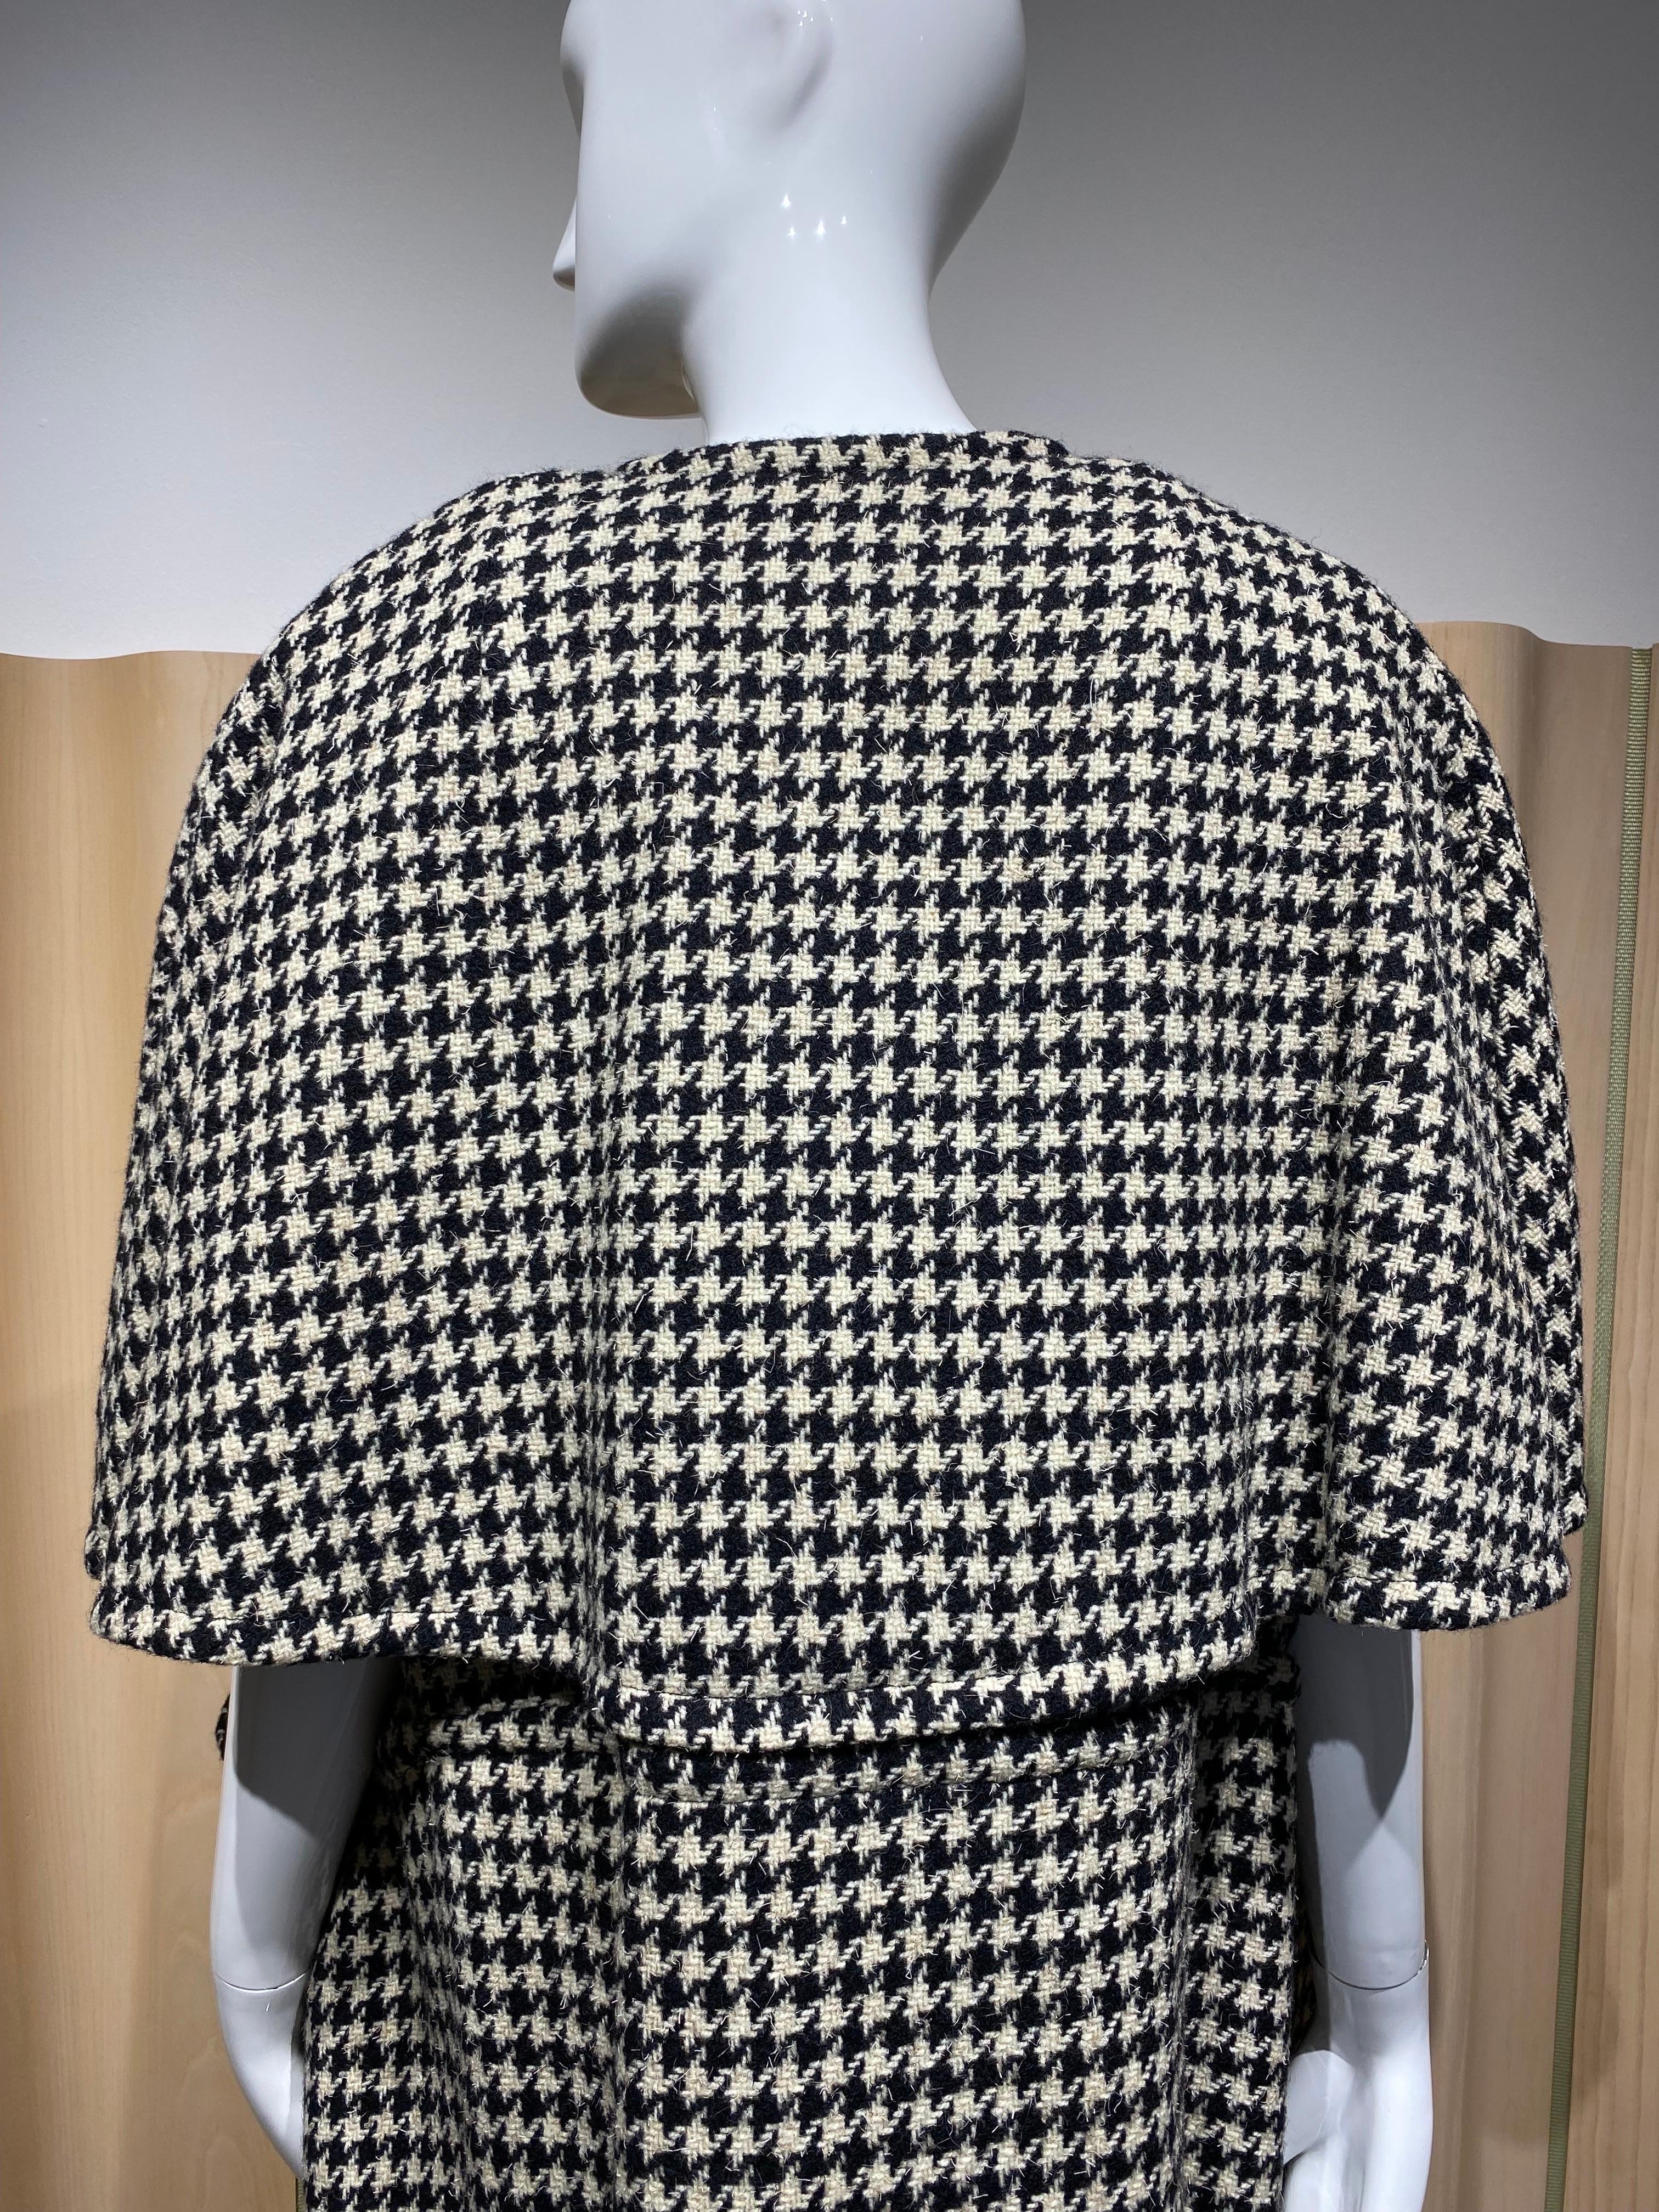 Women's 1960s Rudi Gernreich Houndstooth Wool Cape Coat with Large Pockets